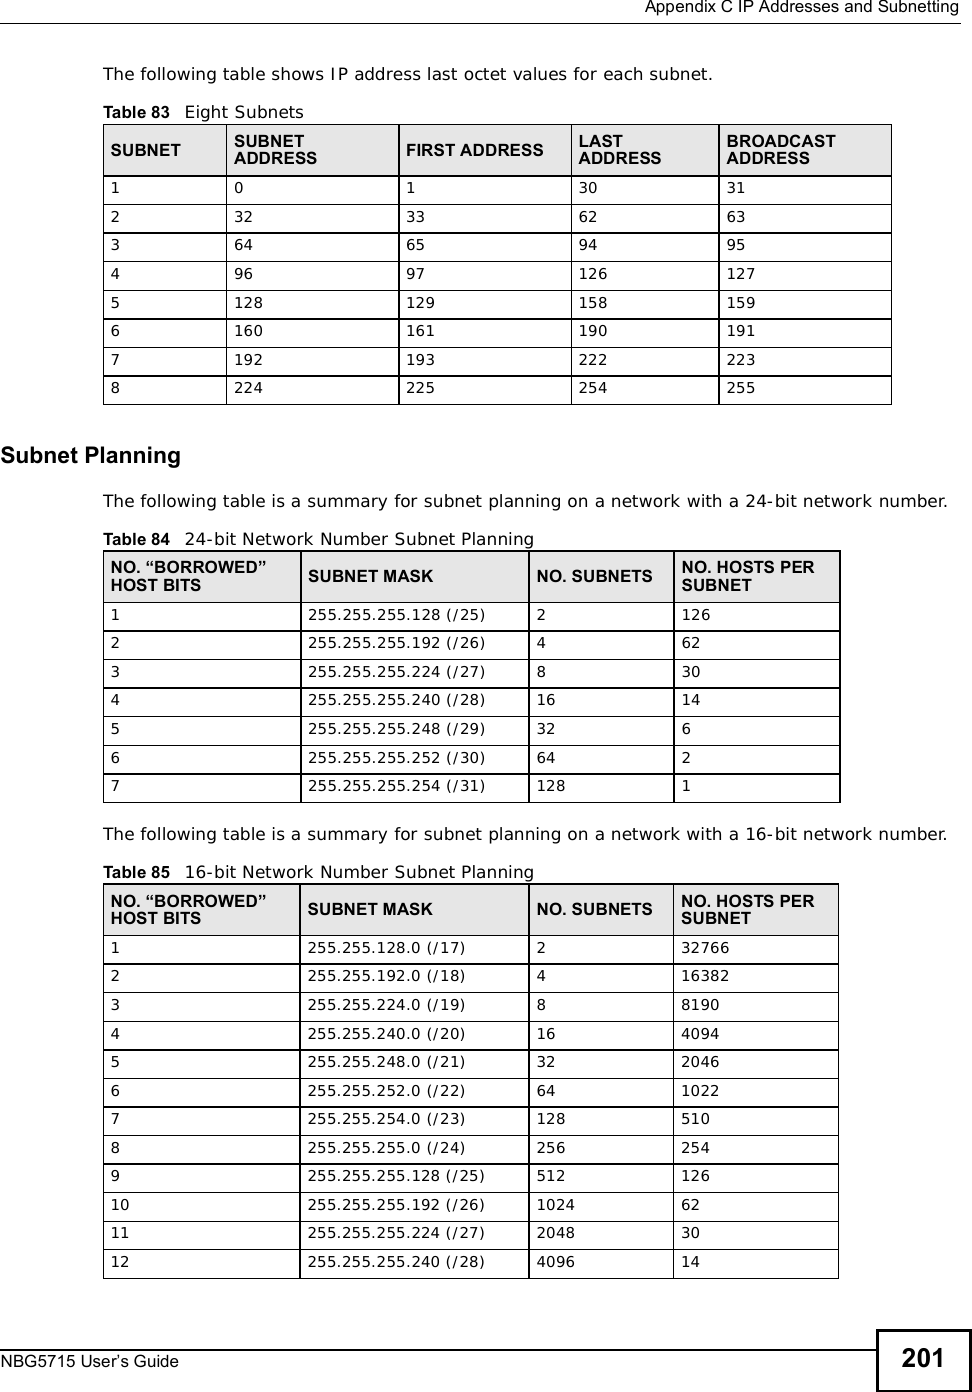  Appendix CIP Addresses and SubnettingNBG5715 User’s Guide 201The following table shows IP address last octet values for each subnet.Subnet PlanningThe following table is a summary for subnet planning on a network with a 24-bit network number.The following table is a summary for subnet planning on a network with a 16-bit network number. Table 83   Eight SubnetsSUBNET SUBNETADDRESS FIRST ADDRESS LAST ADDRESSBROADCAST ADDRESS1 0 1 30 312 32 33 62 633 64 65 94 954 96 97 126 1275128 129 158 1596160 161 190 1917192 193 222 2238224 225 254 255Table 84   24-bit Network Number Subnet PlanningNO. “BORROWED” HOST BITS SUBNET MASK NO. SUBNETS NO. HOSTS PER SUBNET1255.255.255.128 (/25) 2 1262255.255.255.192 (/26) 4 623 255.255.255.224 (/27) 8 304 255.255.255.240 (/28) 16 145 255.255.255.248 (/29) 32 66 255.255.255.252 (/30) 64 27 255.255.255.254 (/31) 128 1Table 85   16-bit Network Number Subnet PlanningNO. “BORROWED” HOST BITS SUBNET MASK NO. SUBNETS NO. HOSTS PER SUBNET1255.255.128.0 (/17) 2 327662255.255.192.0 (/18) 4 163823255.255.224.0 (/19) 8 81904 255.255.240.0 (/20) 16 40945 255.255.248.0 (/21) 32 20466 255.255.252.0 (/22) 64 10227 255.255.254.0 (/23) 128 5108255.255.255.0 (/24) 256 2549255.255.255.128 (/25) 512 12610 255.255.255.192 (/26) 1024 6211 255.255.255.224 (/27) 2048 3012 255.255.255.240 (/28) 4096 14